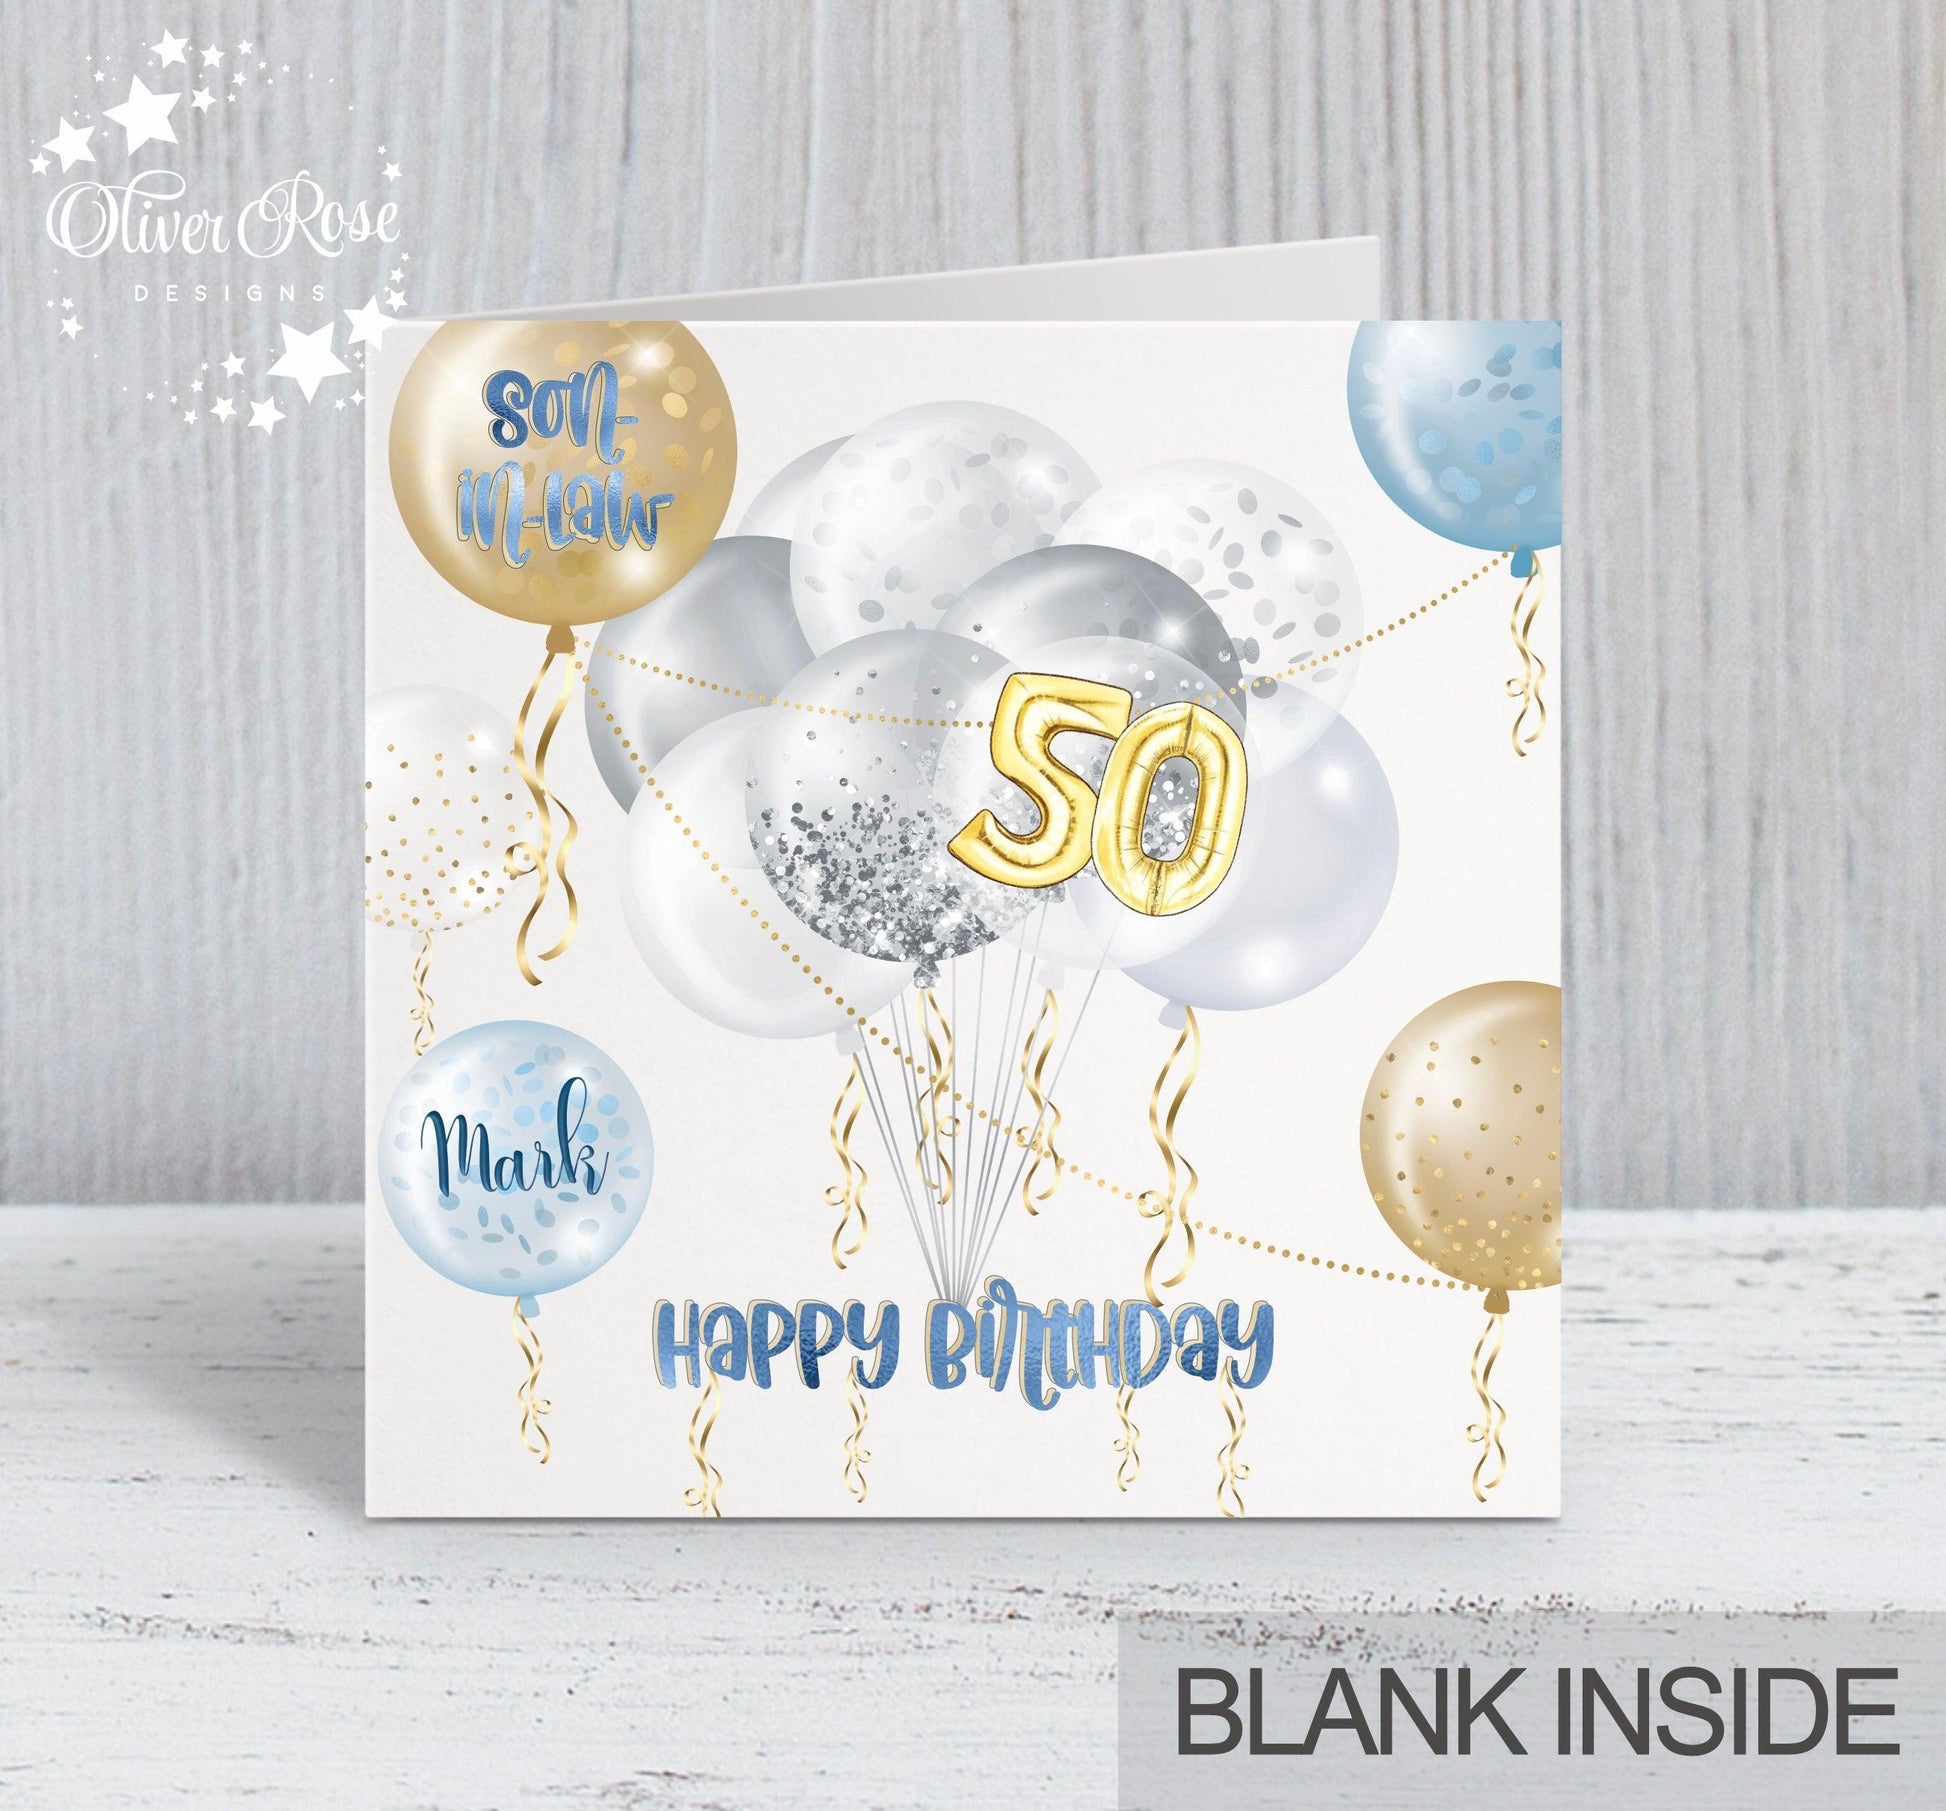 Blue & Gold Effect Balloons Birthday Card, Son-In-Law, 50th, Personalised Card